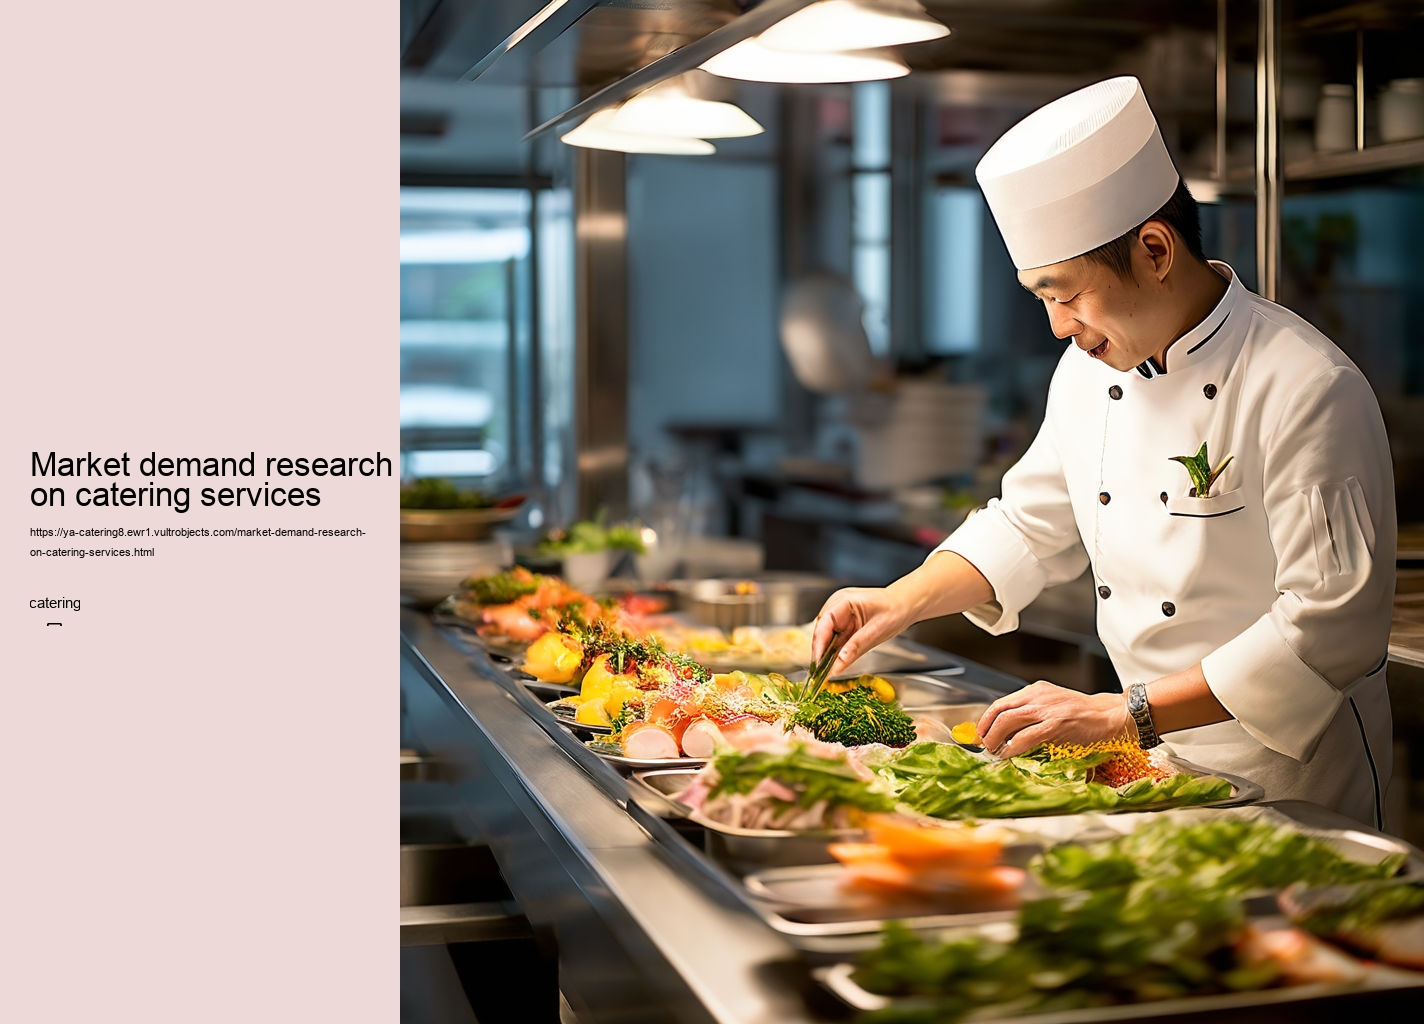 Market demand research on catering services